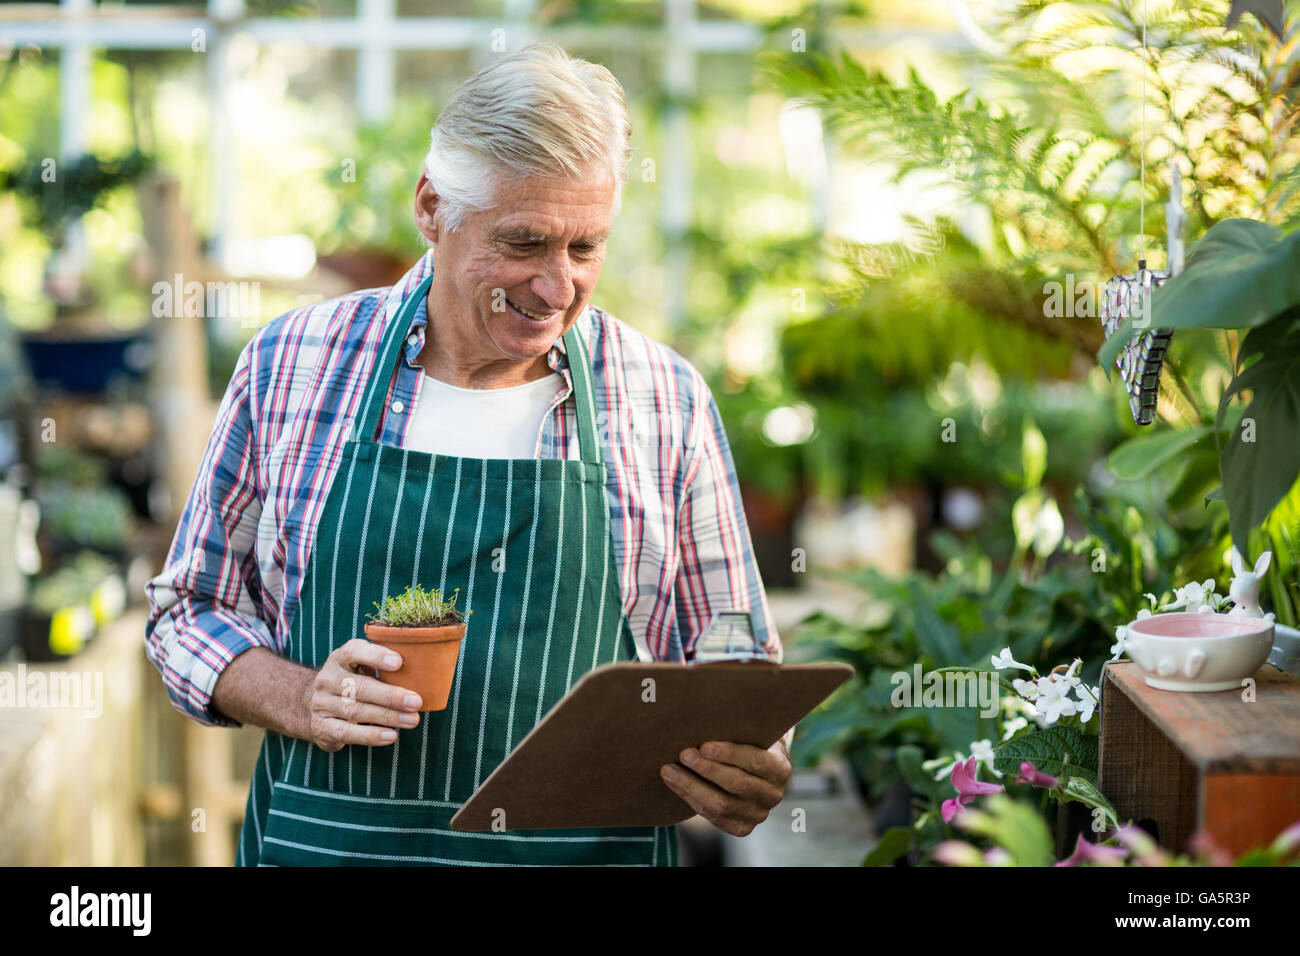 Male gardener holding potted plant and clipboard Stock Photo